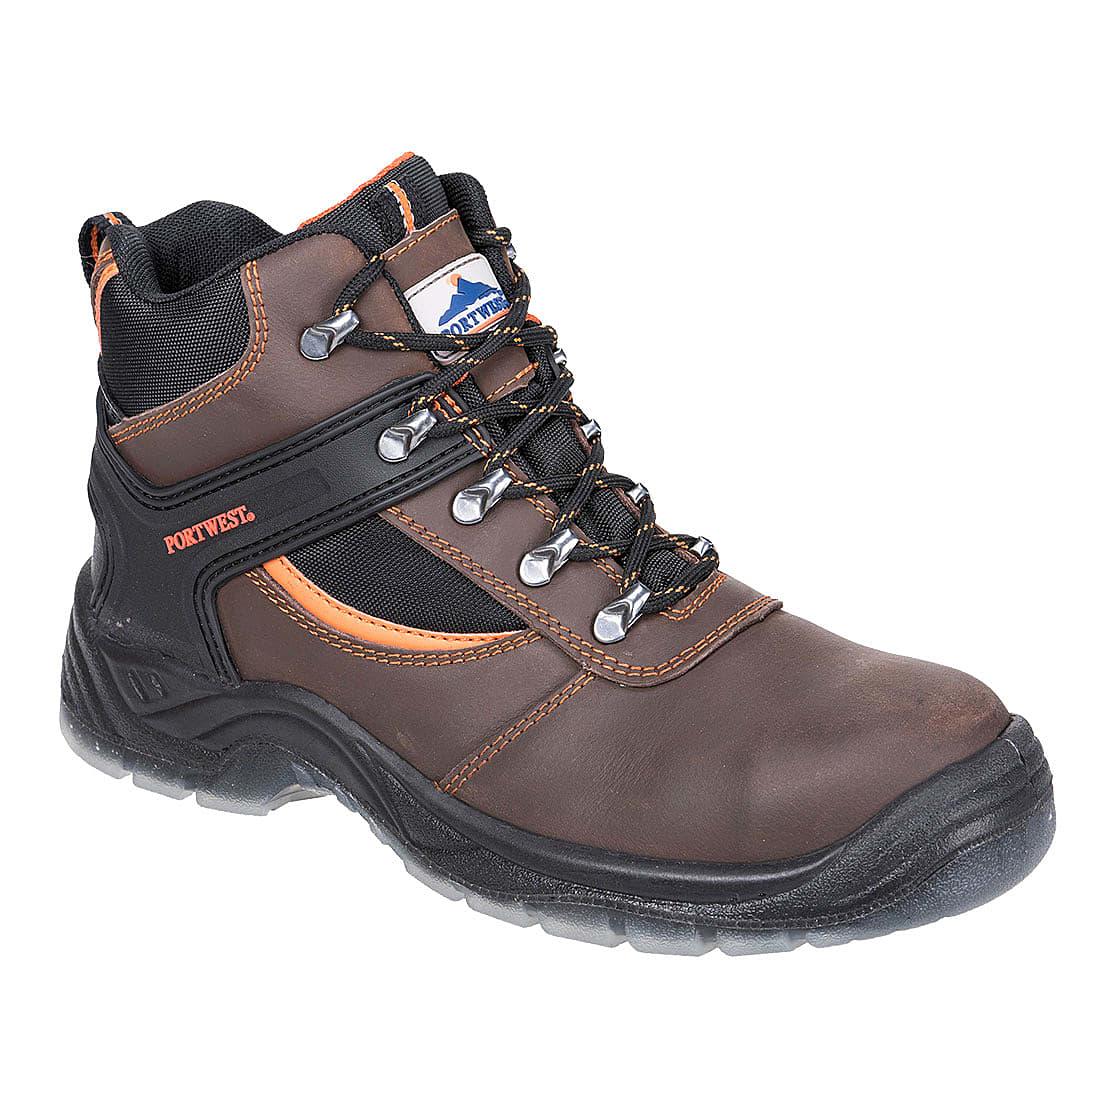 Portwest Steelite Mustang Boots S3 in Brown (Product Code: FW69)